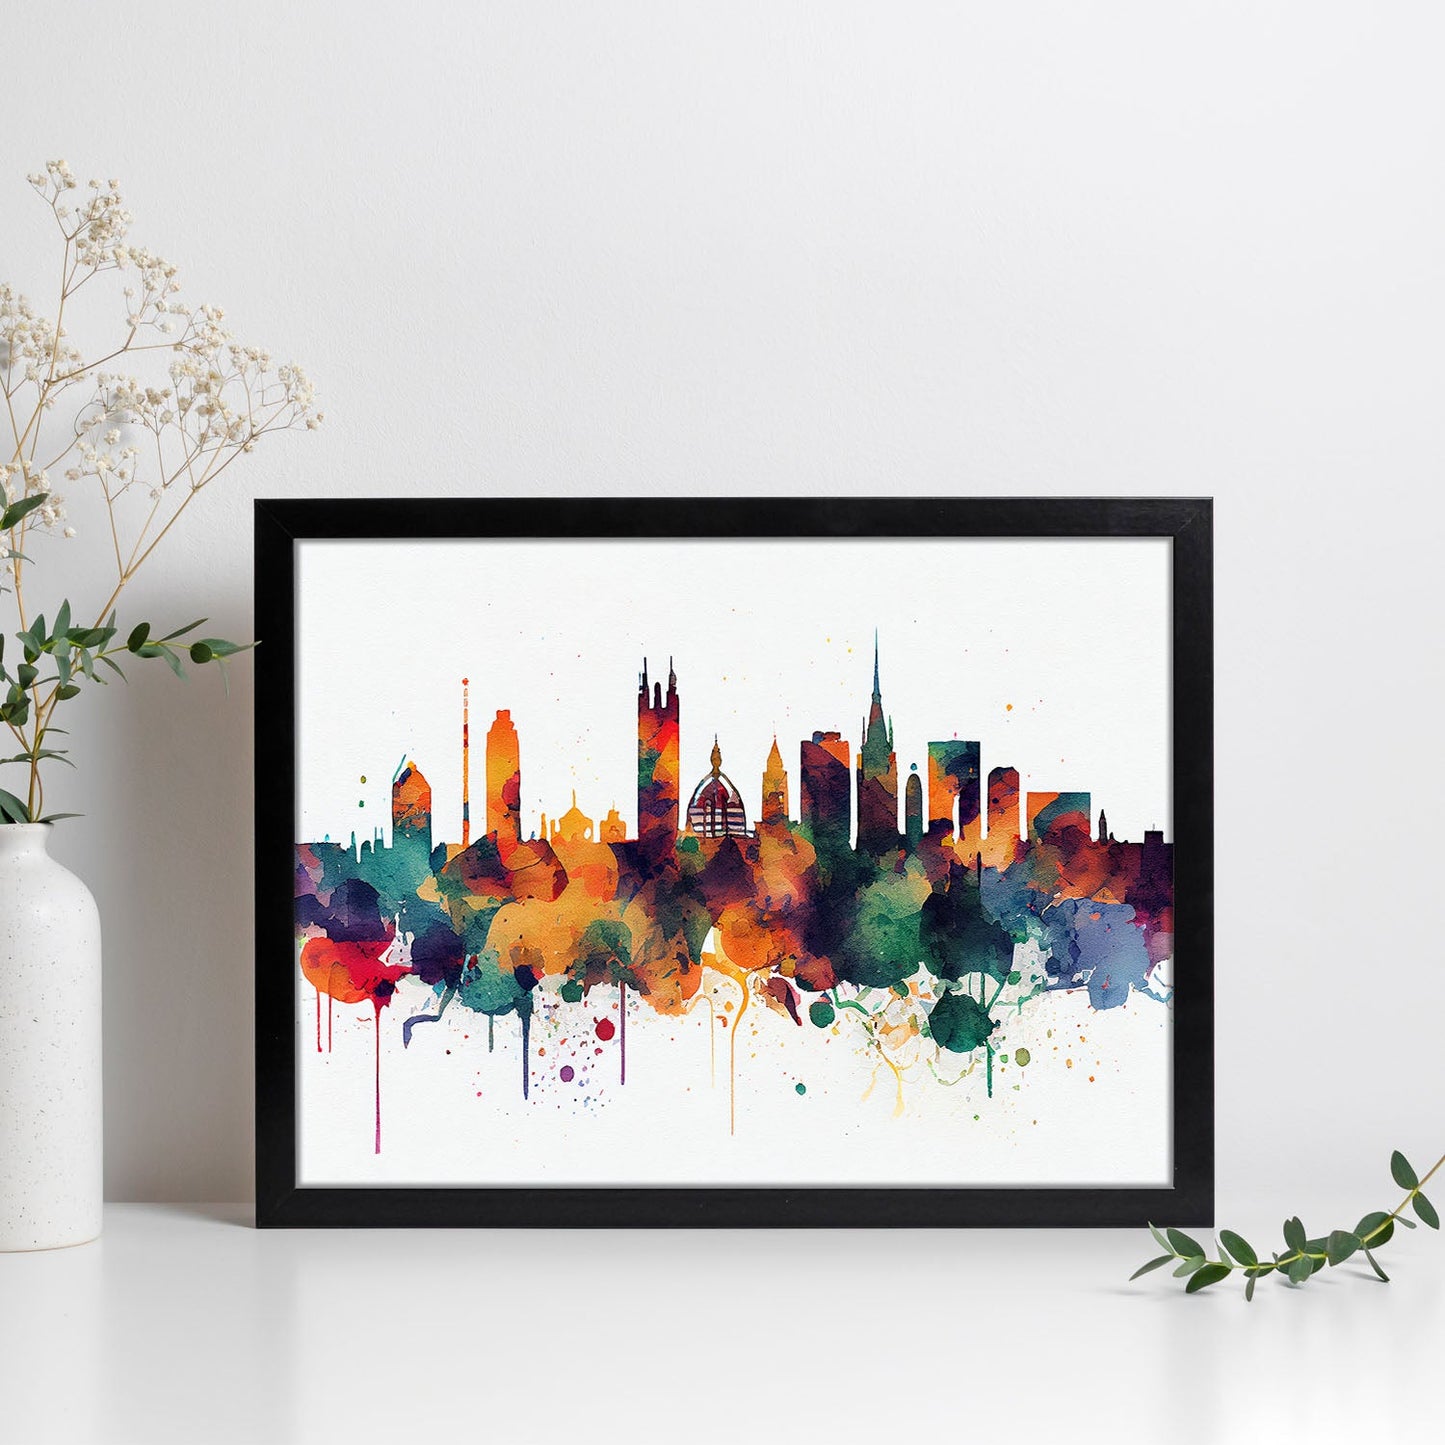 Nacnic watercolor of a skyline of the city of Manchester. Aesthetic Wall Art Prints for Bedroom or Living Room Design.-Artwork-Nacnic-A4-Sin Marco-Nacnic Estudio SL